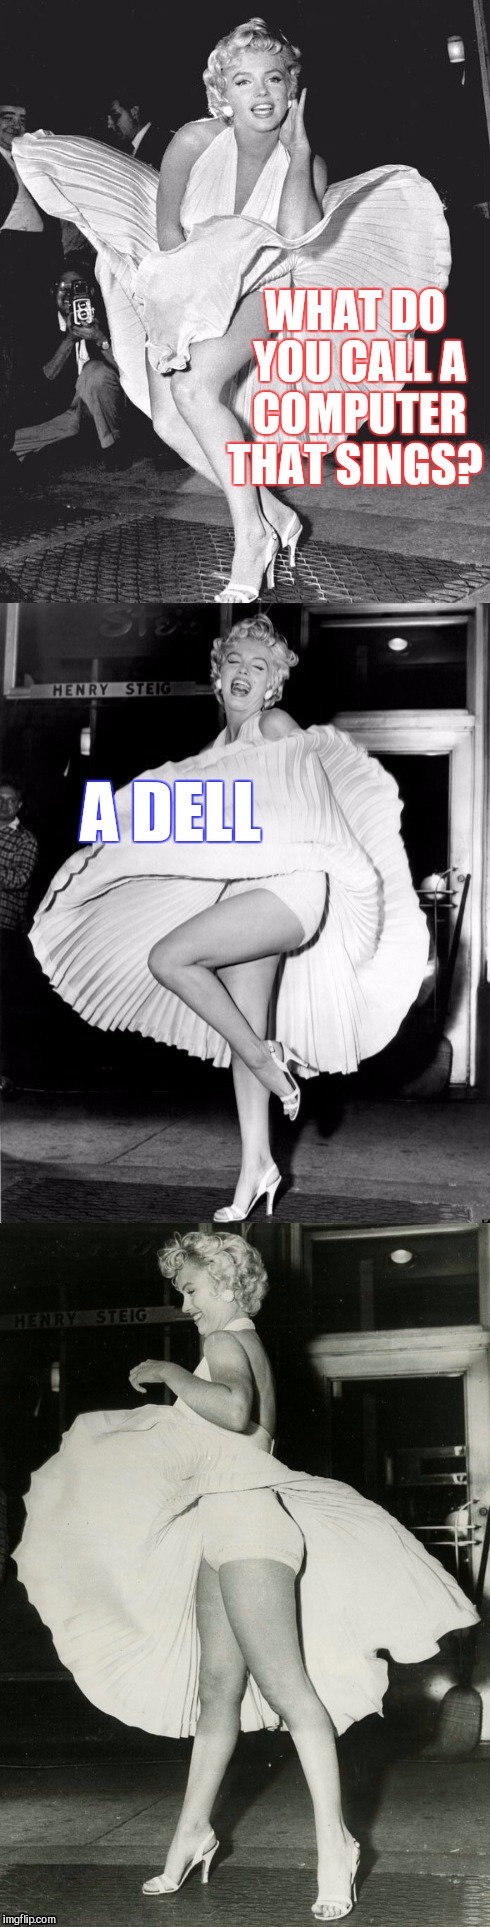 Marilyn Monroe joke template  | WHAT DO YOU CALL A COMPUTER THAT SINGS? A DELL | image tagged in marilyn monroe joke template,marilyn monroe,jbmemegeek,bad jokes,bad pun,adele | made w/ Imgflip meme maker